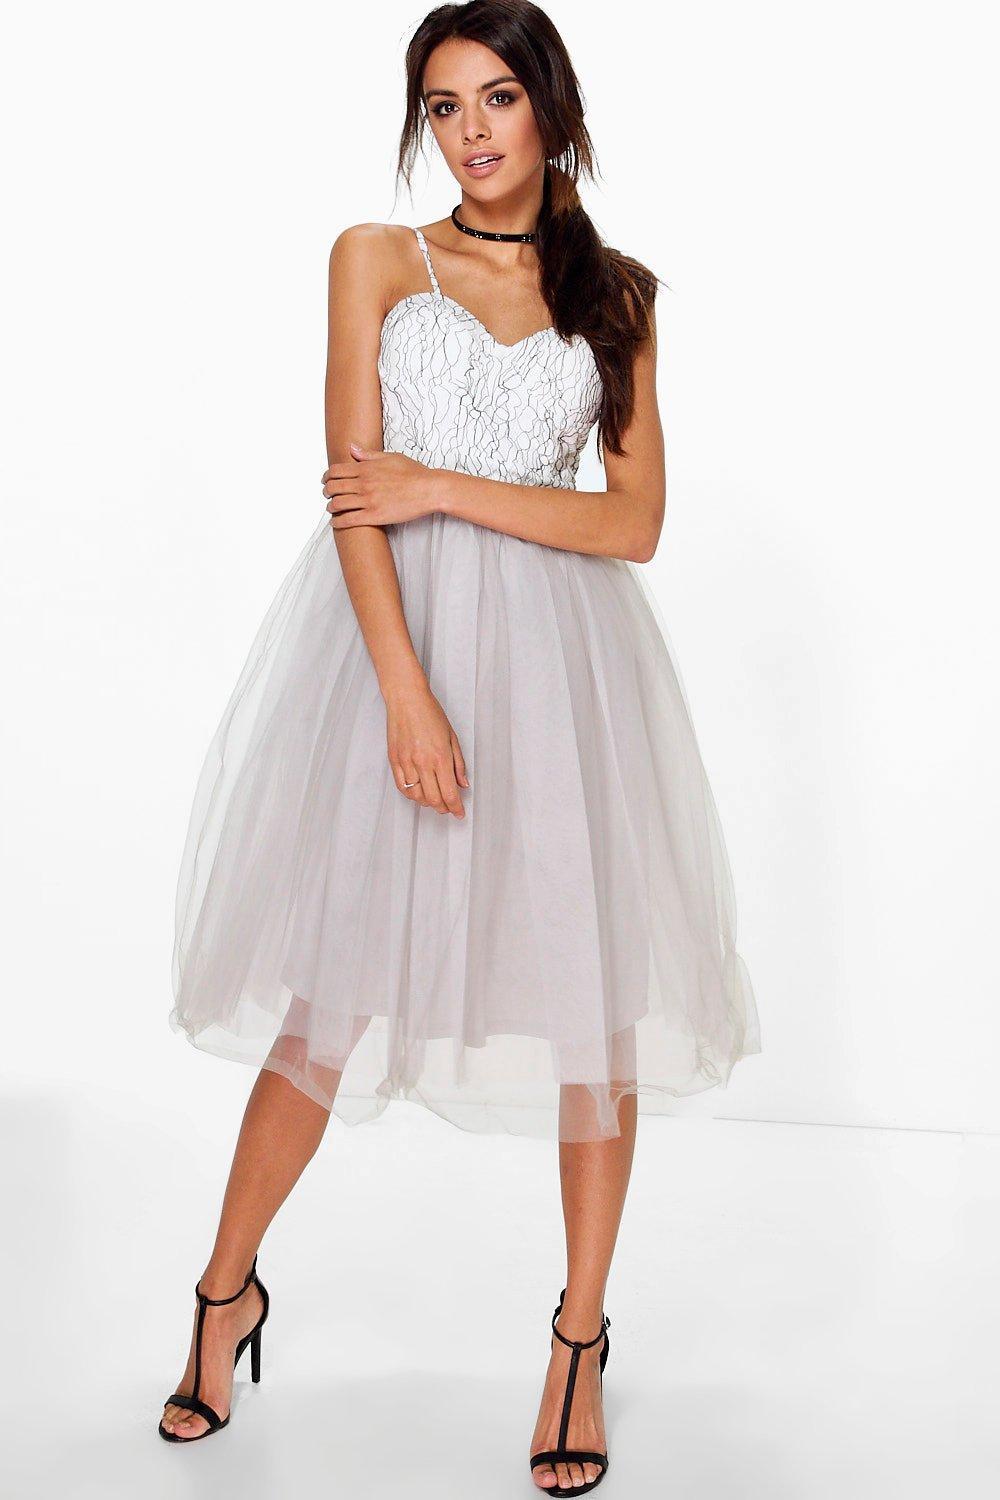 Boohoo Boutique Ana Corded Lace Tulle Prom Dress in Grey (Gray) - Lyst